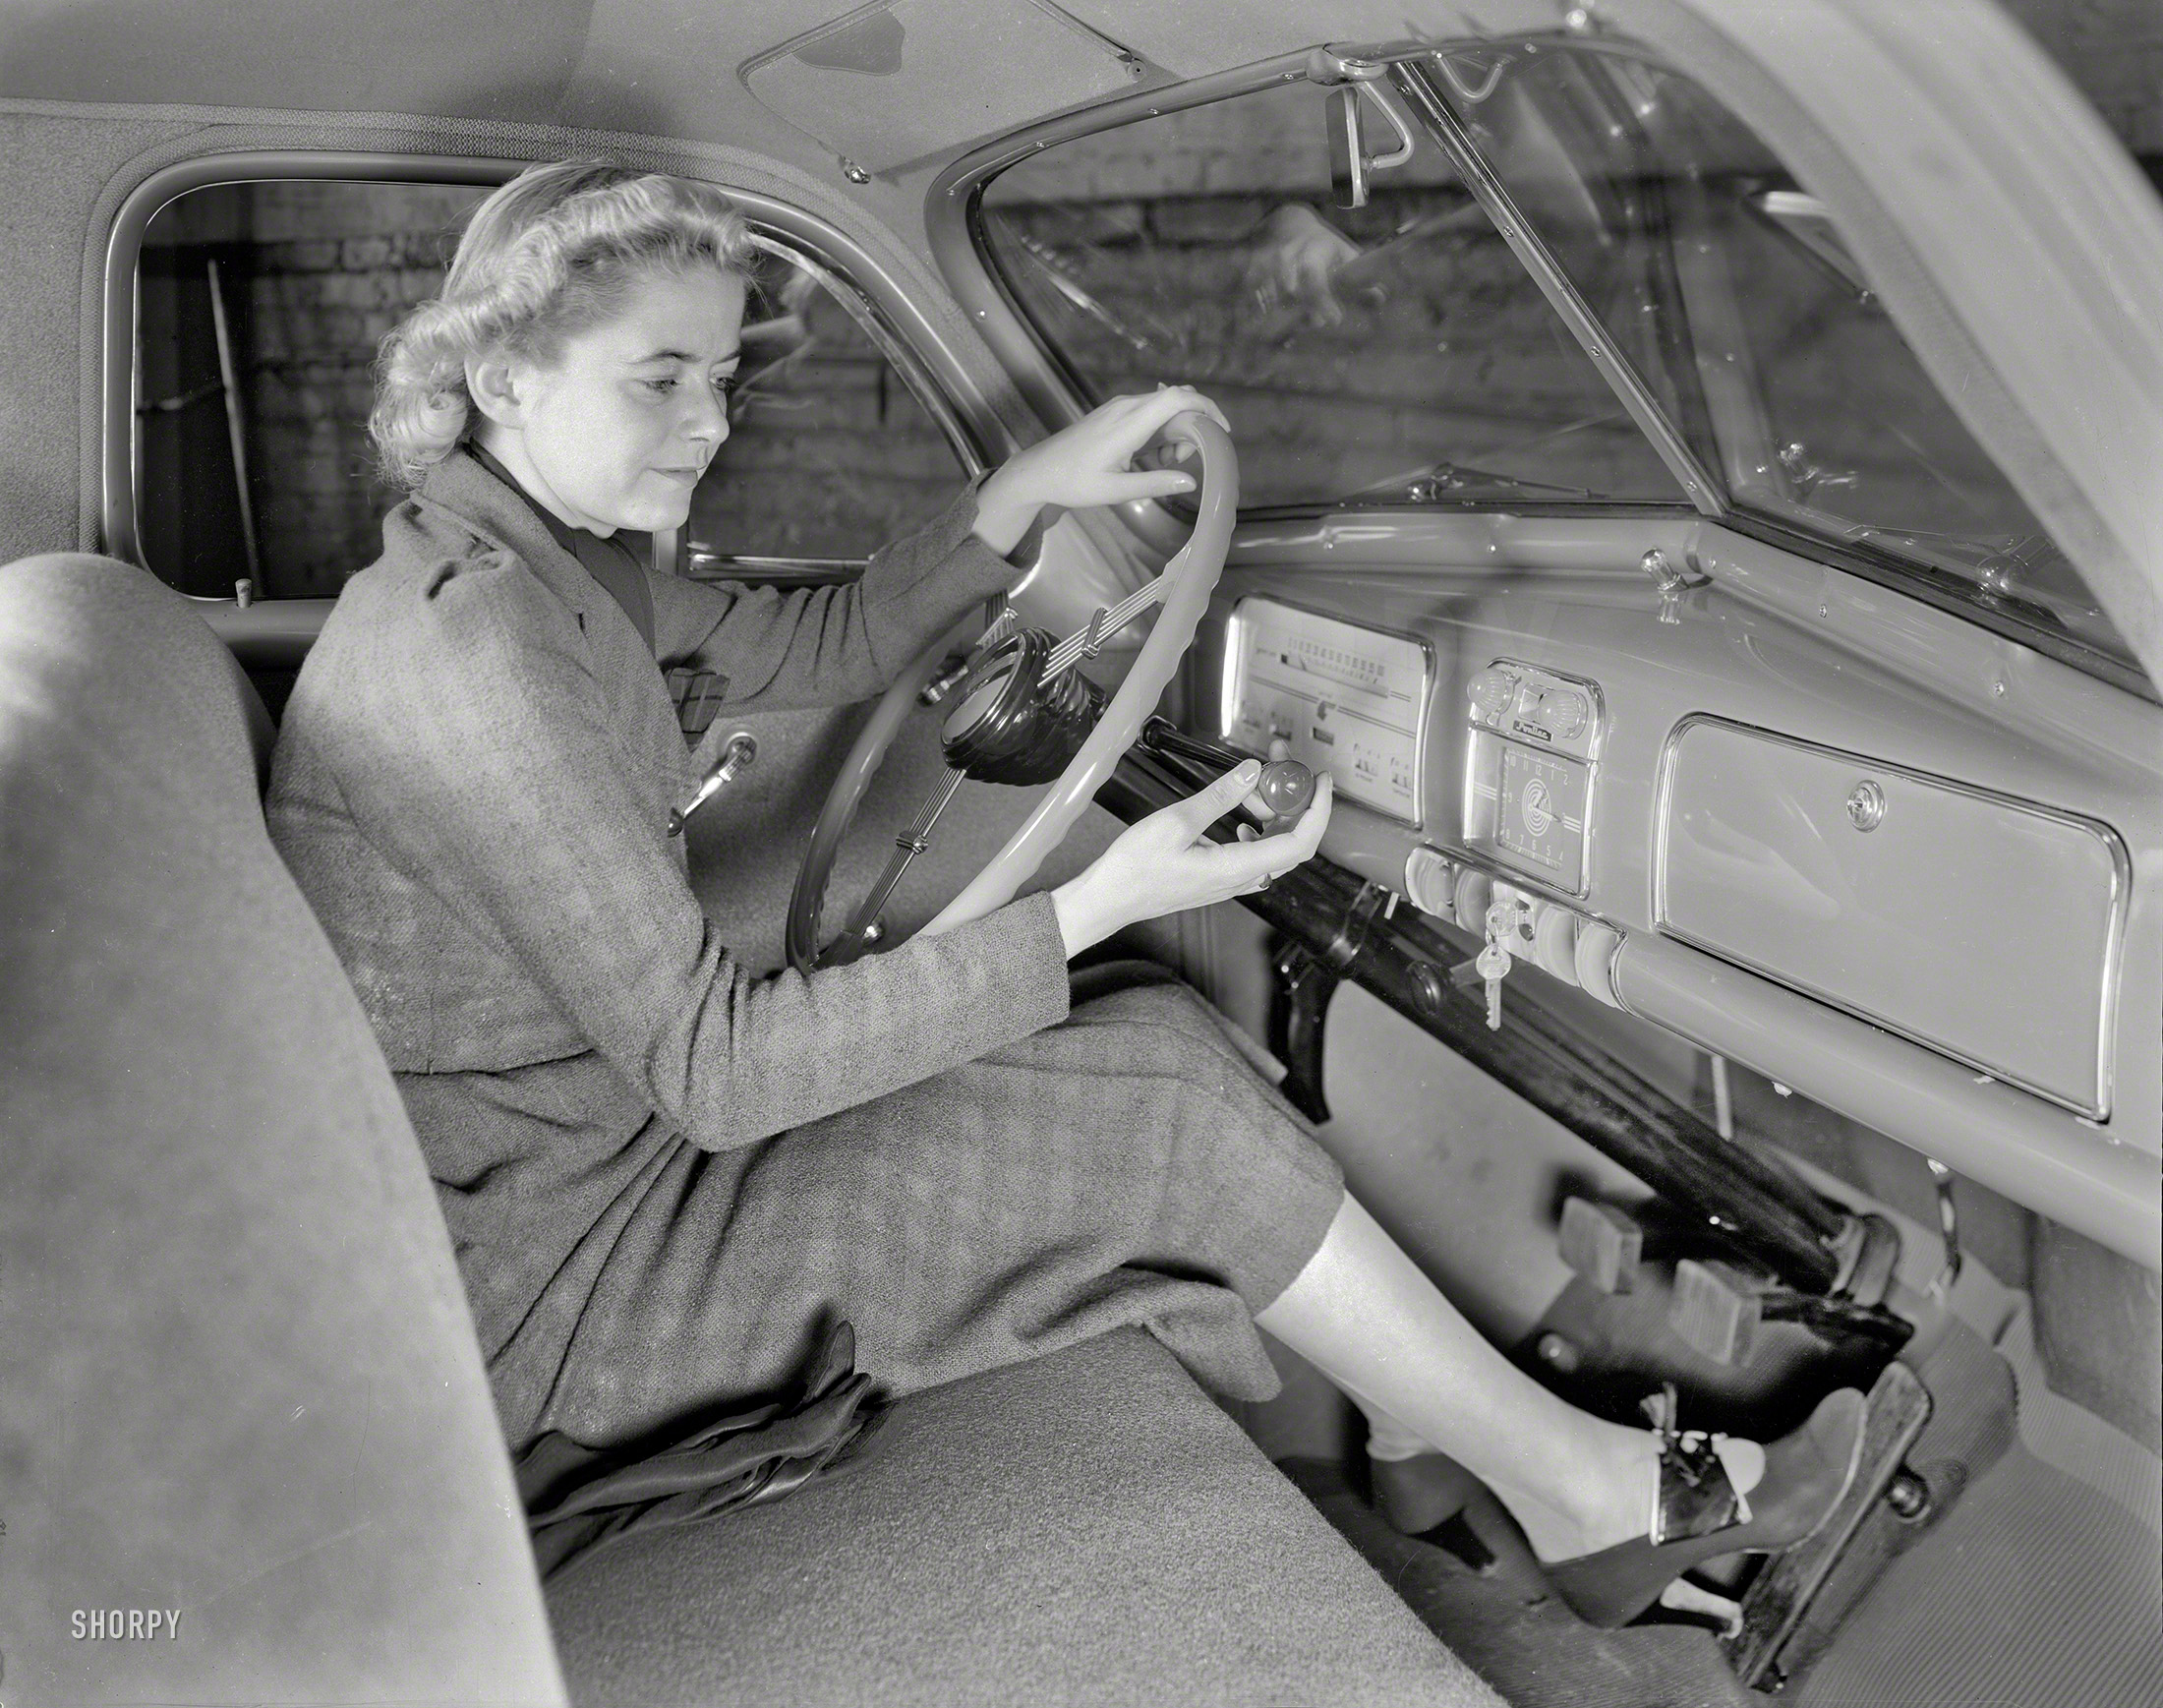 1937. "Woman demonstrating remote-control 'Safety Shift' gear lever in 1938 Pontiac sedan." Adding another page to our excruciatingly detailed visual record of early Pontiac marketing in the Bay Area. 8x10 acetate negative. View full size.